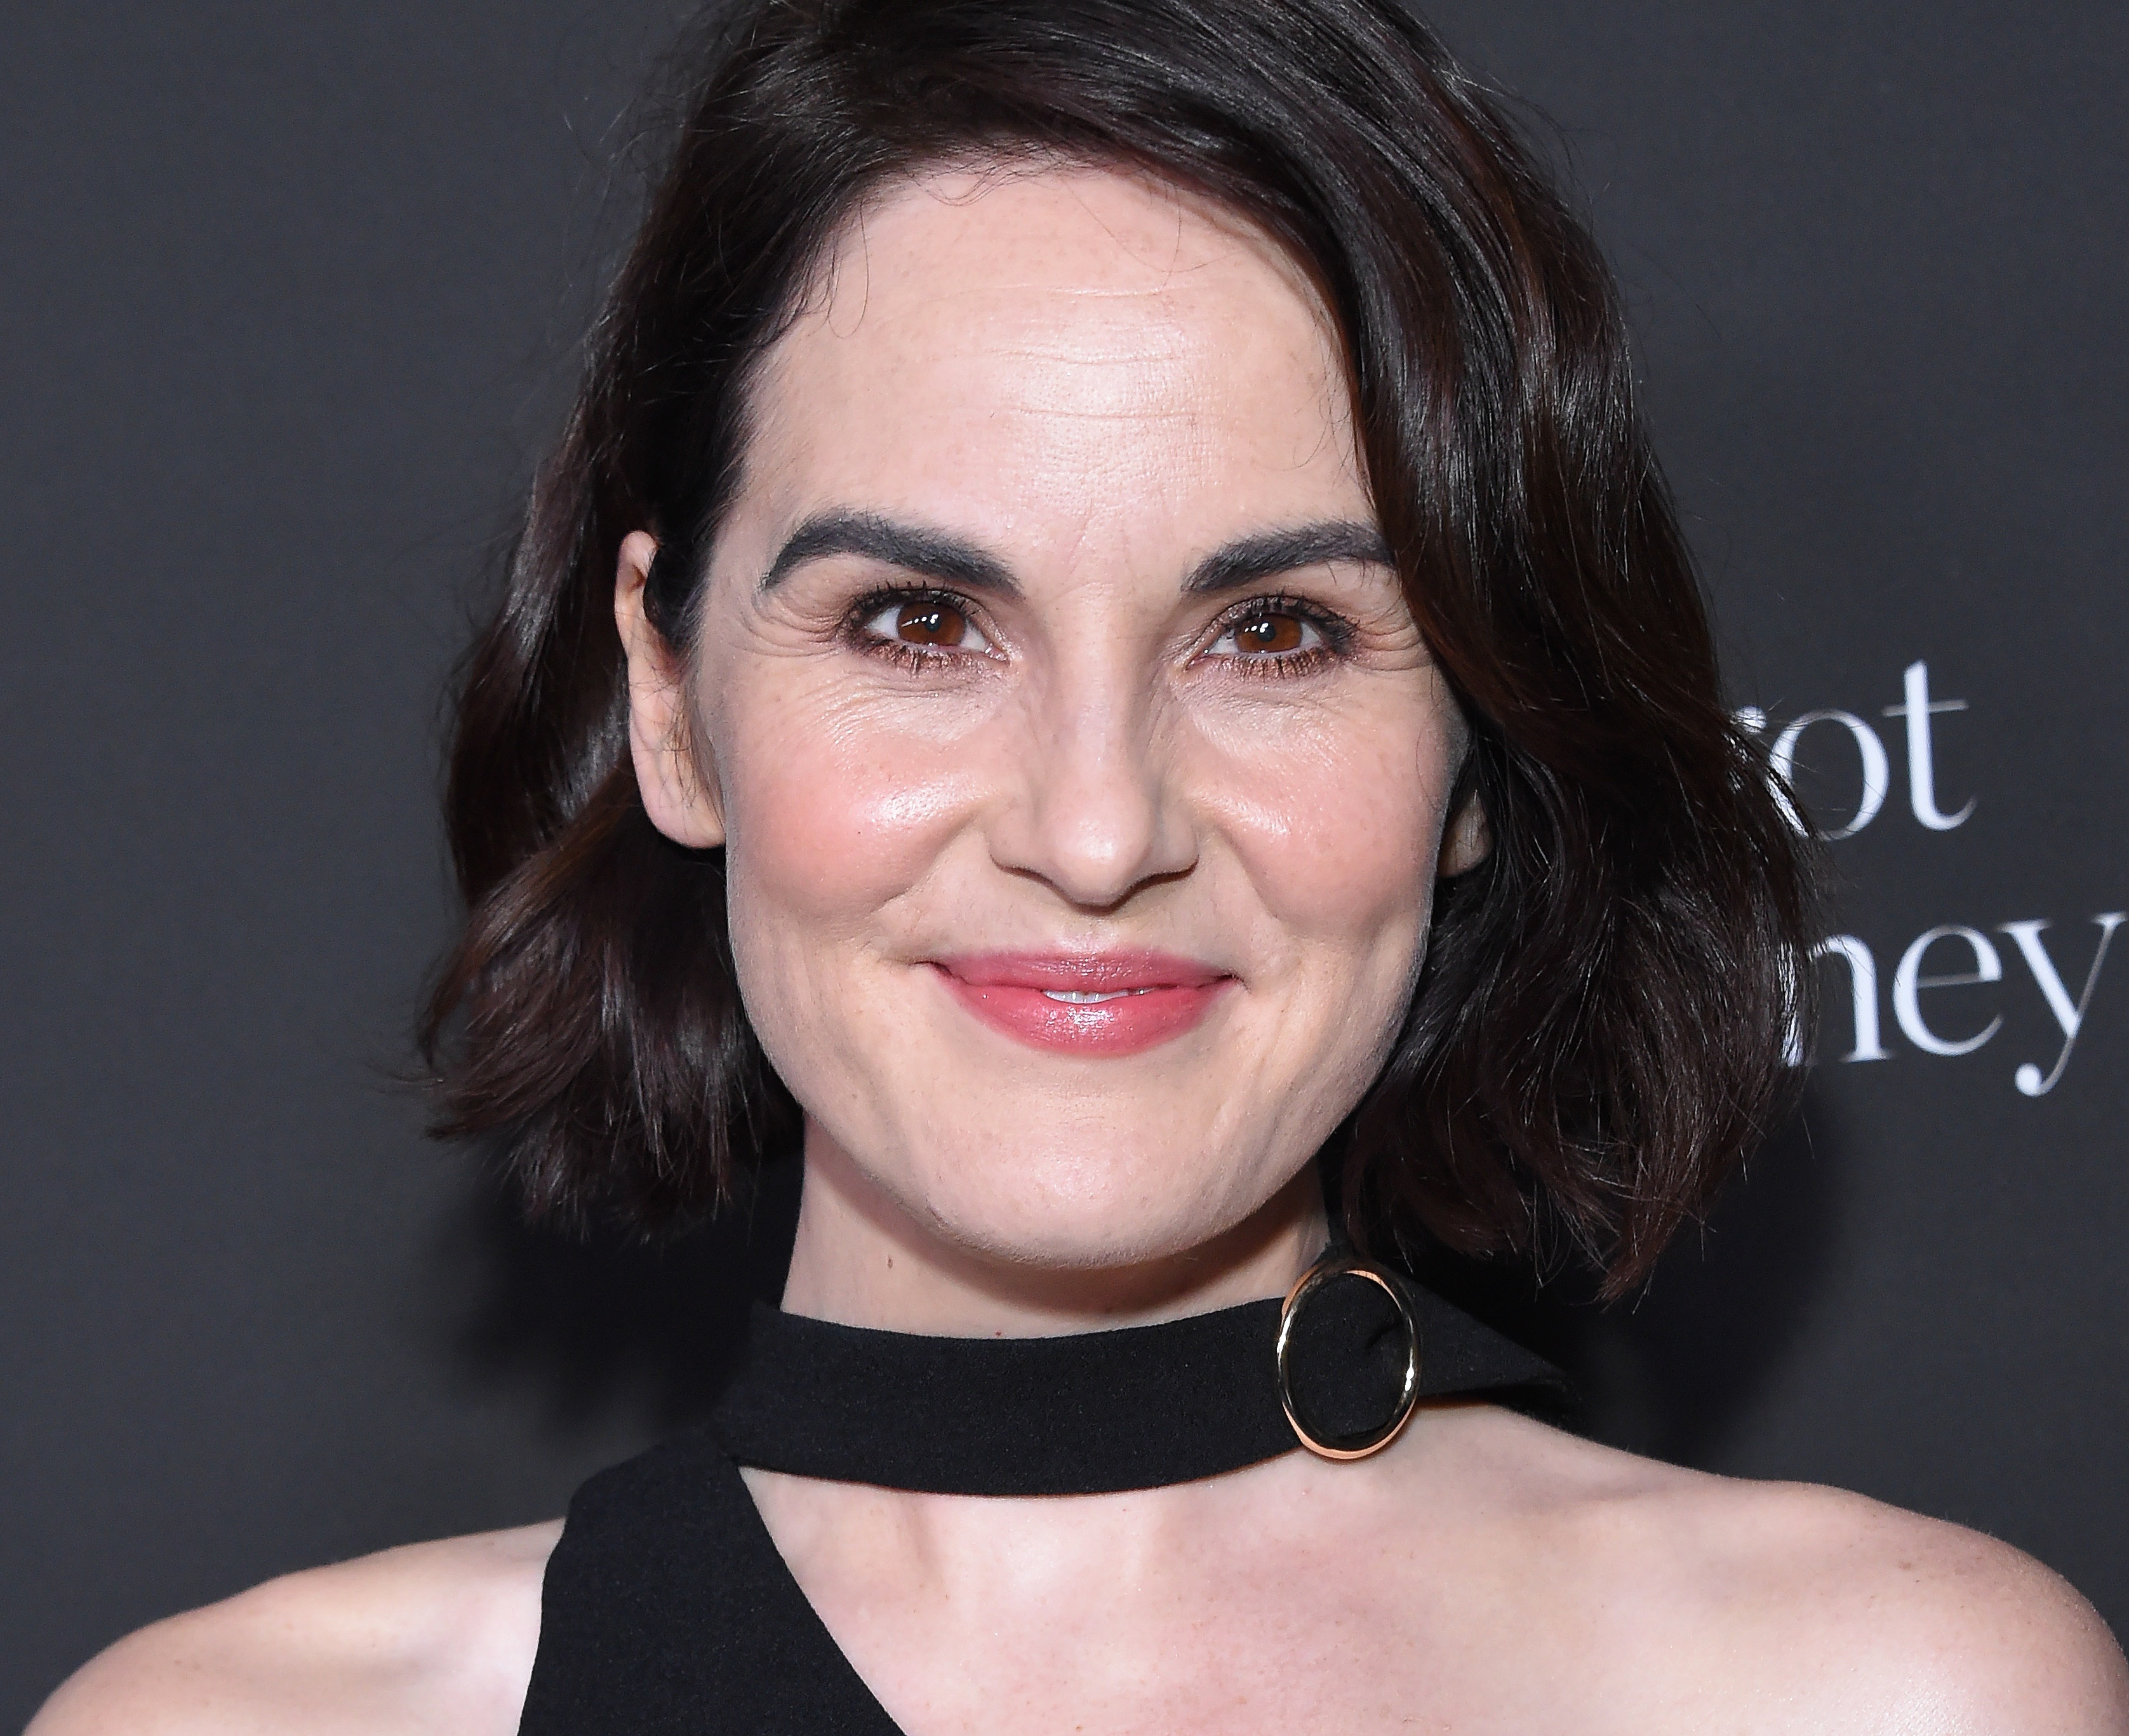 Michelle Dockery on How to Turn Nerves Into Vulnerability While Acting on Camera